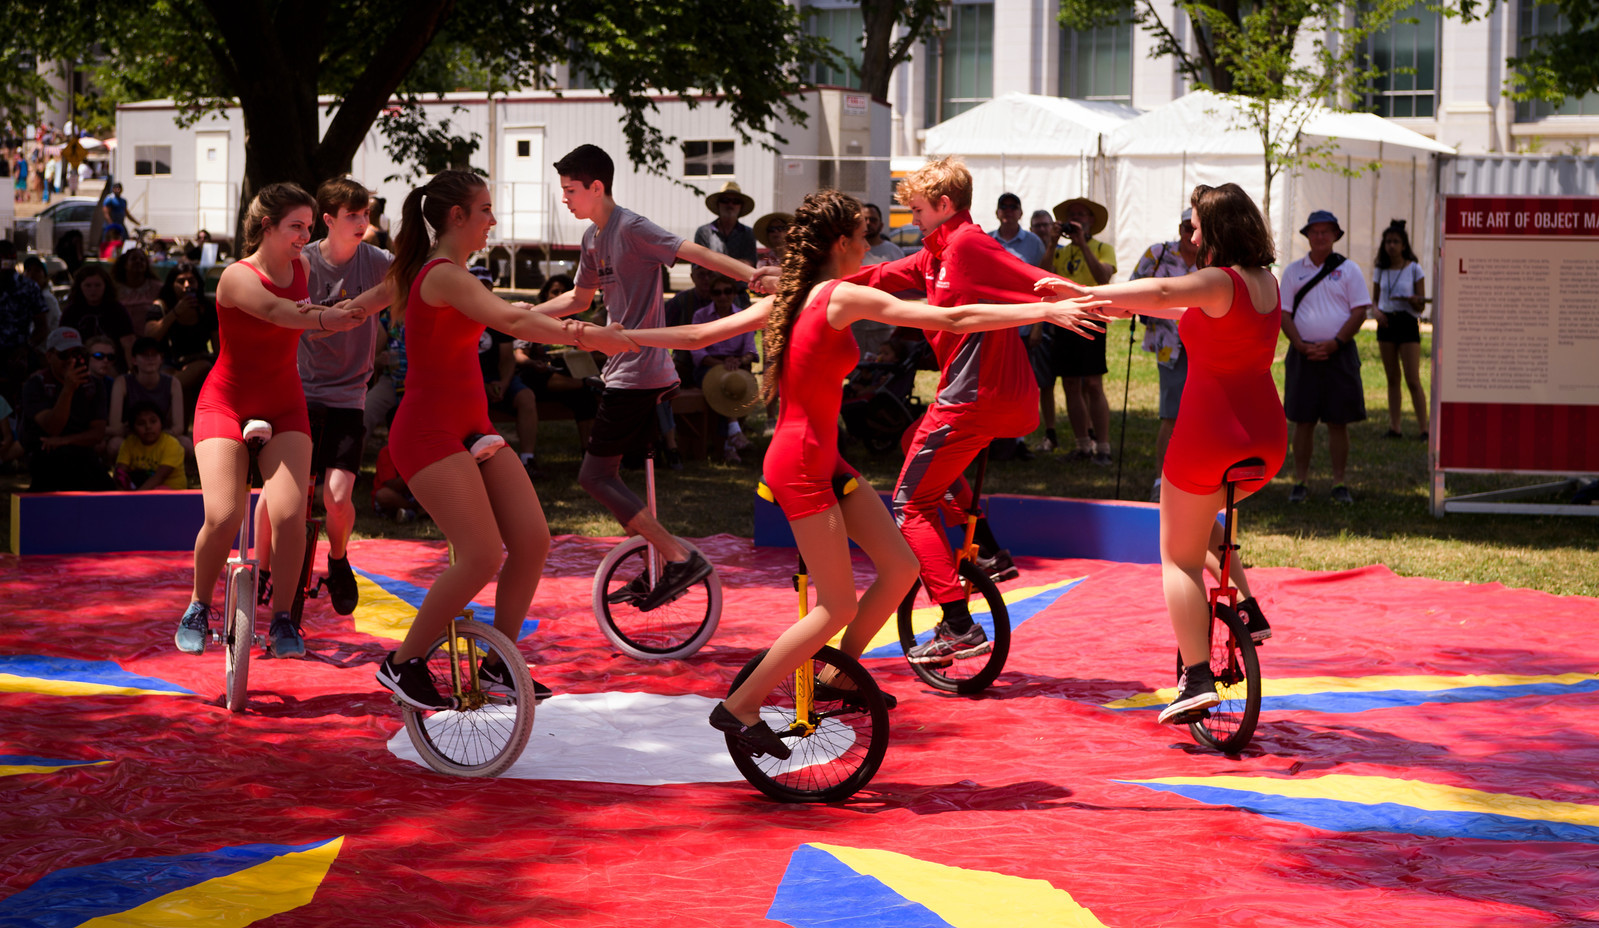 Sailor Circus performers do a unicycle demonstration on June 29 on the National Mall at the Smithsonian Folklife Festival. Photo by Cliff Roles